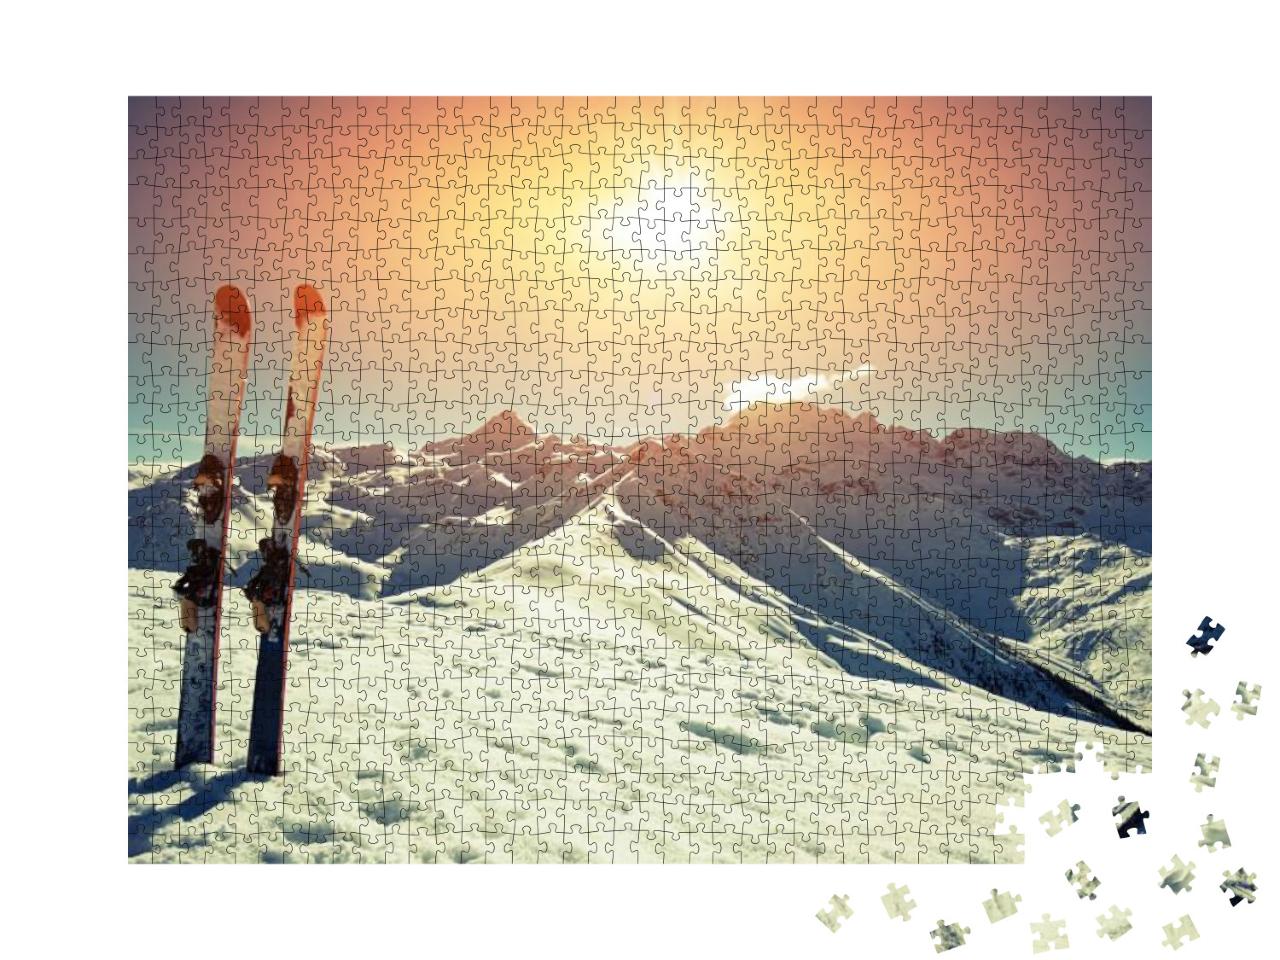 Skis in Snow At Mountains... Jigsaw Puzzle with 1000 pieces